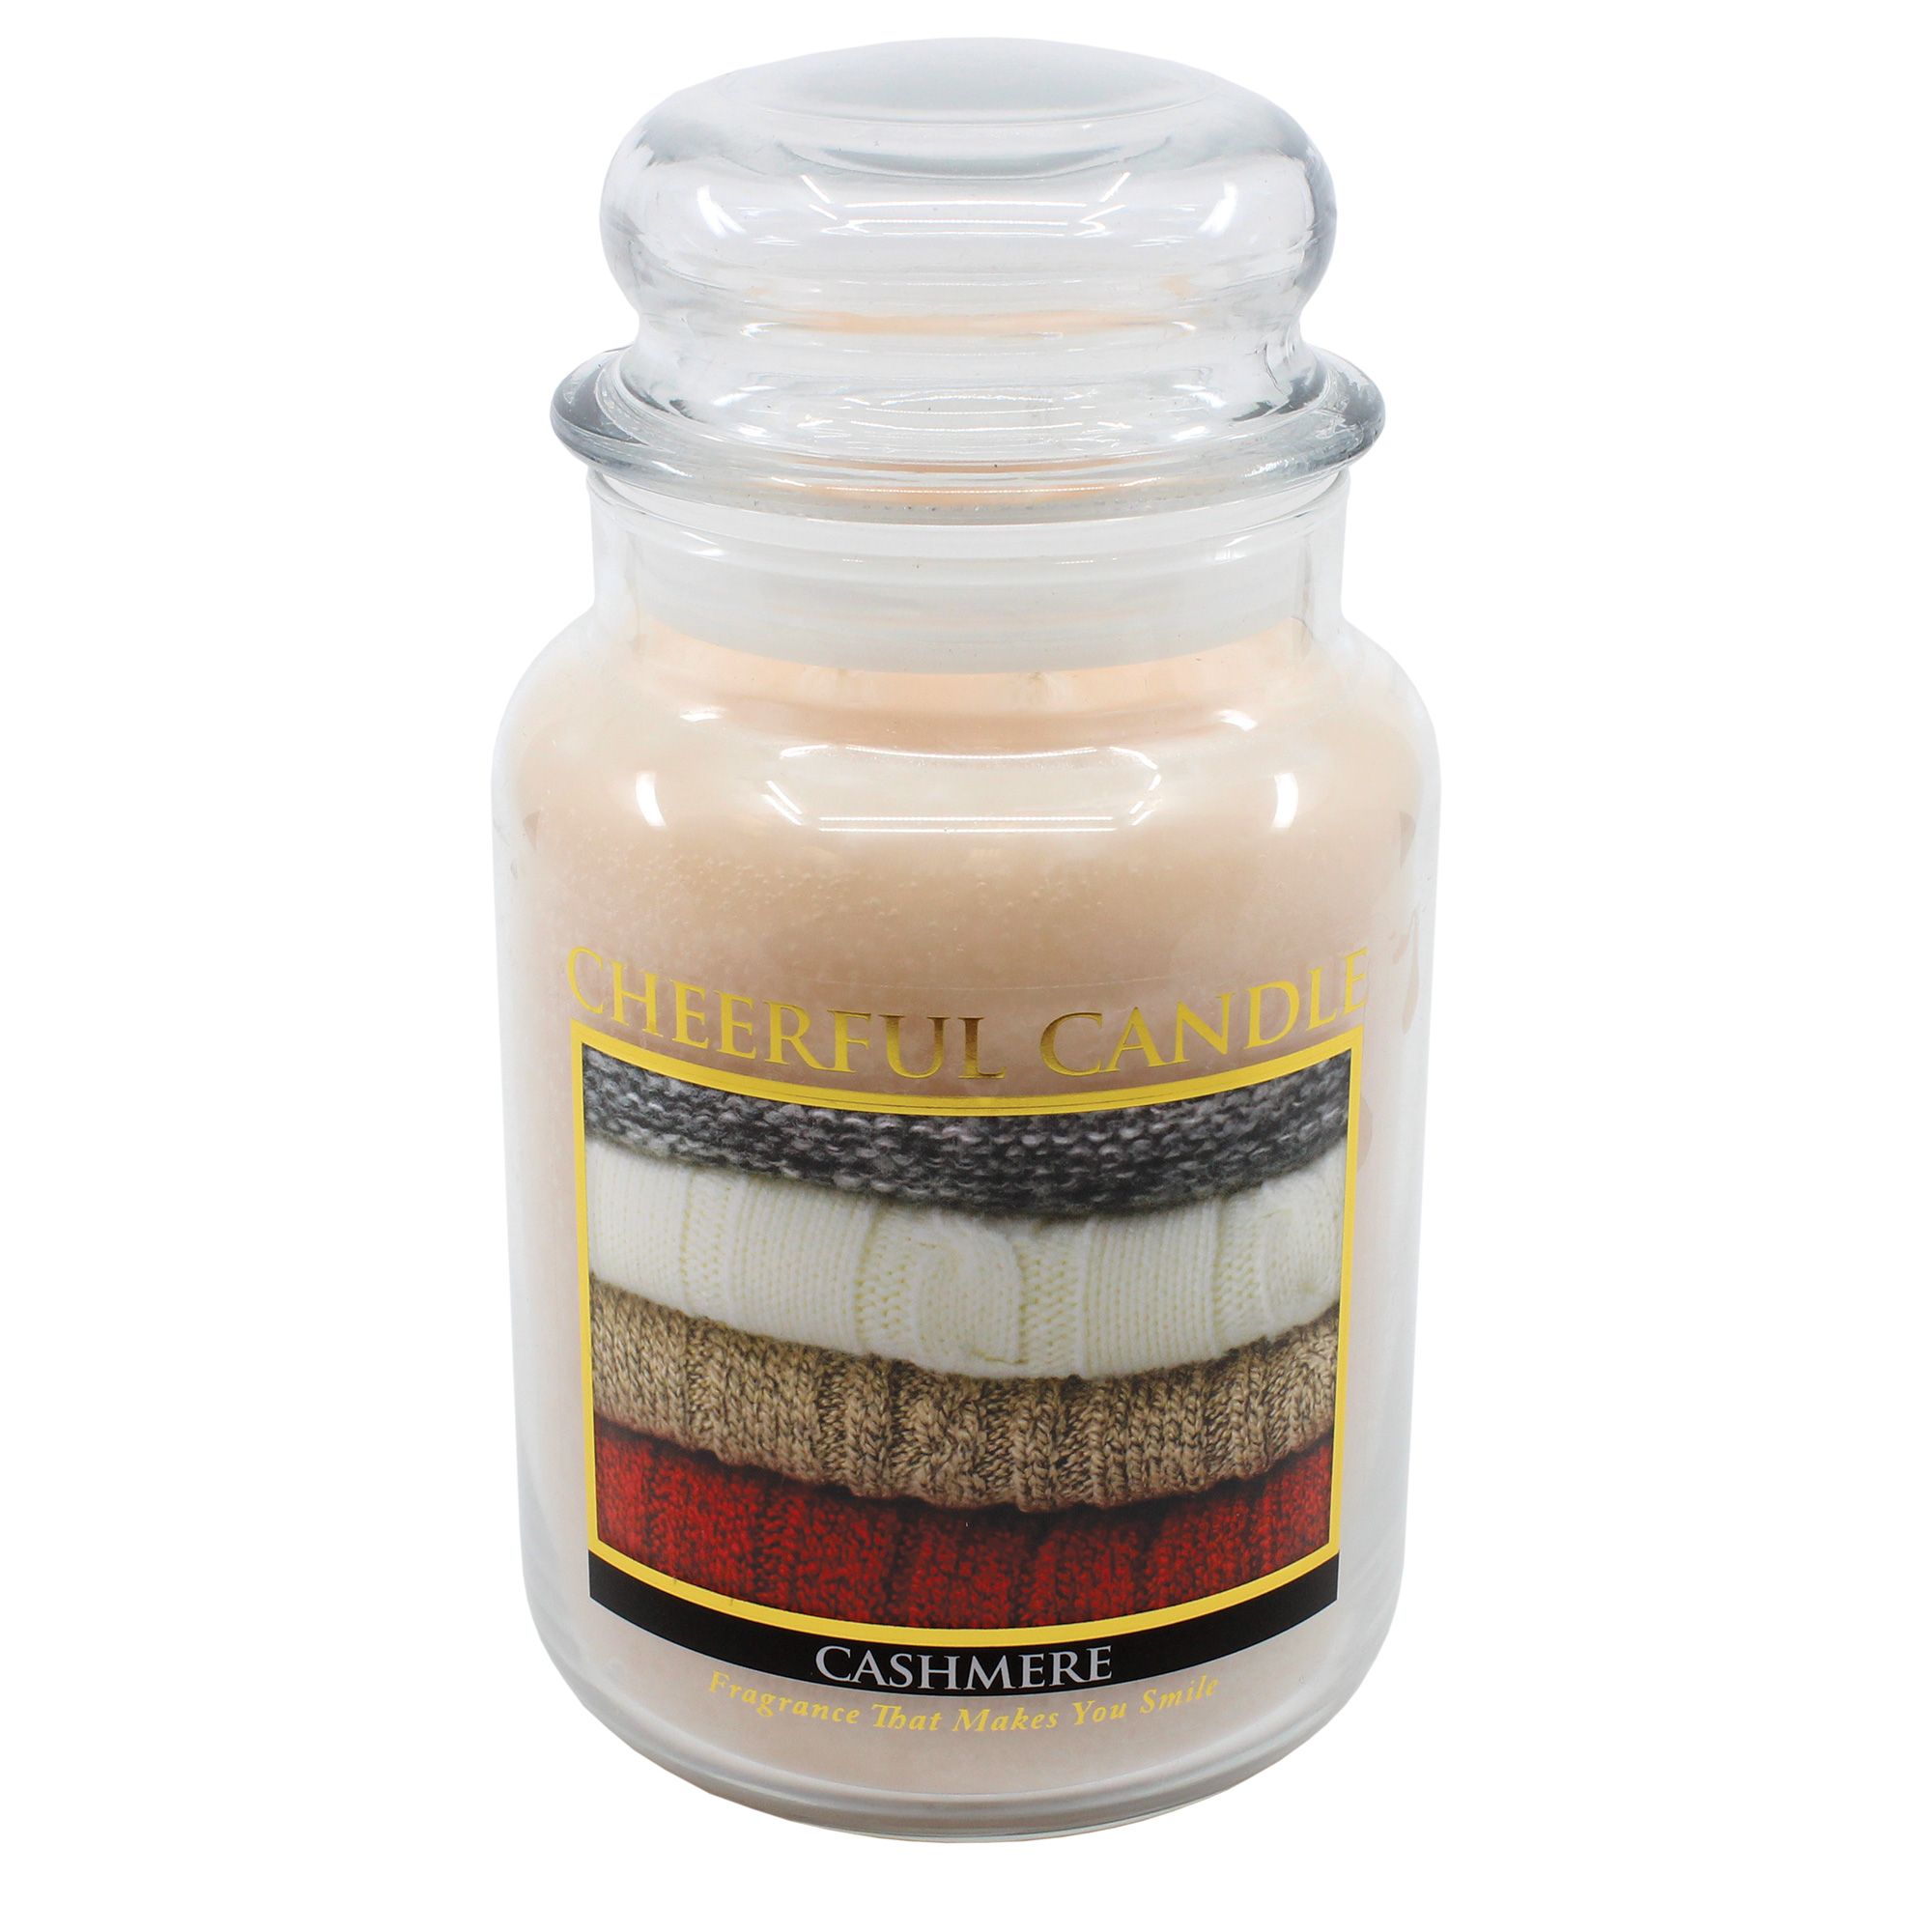 CASHMERE  Small - Cheerful Candle